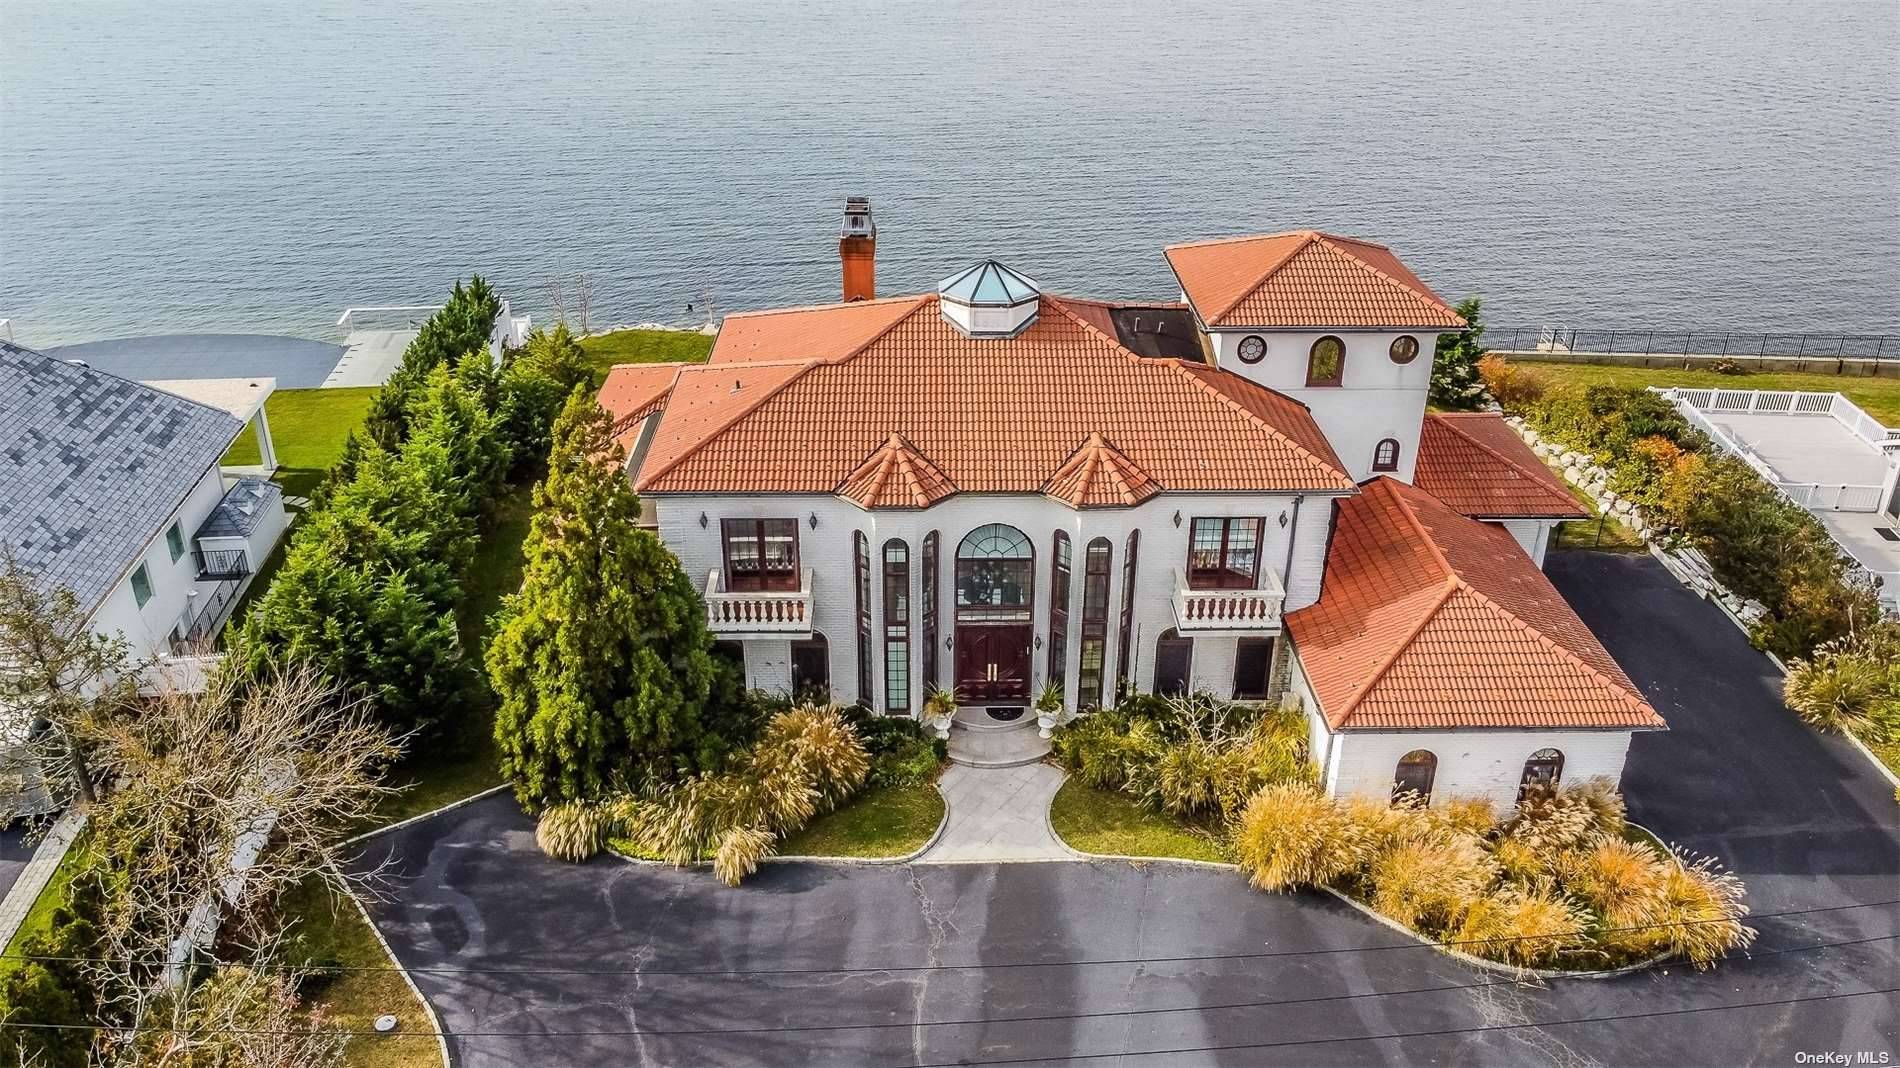 This Is A Must see Custom Built Elegant And Exceptional Lifestyle Awaits At This Dazzling Mediterranean Waterfront Gem, Own A Slice Of Paradise On Long Island Sound With 180 Degree ...